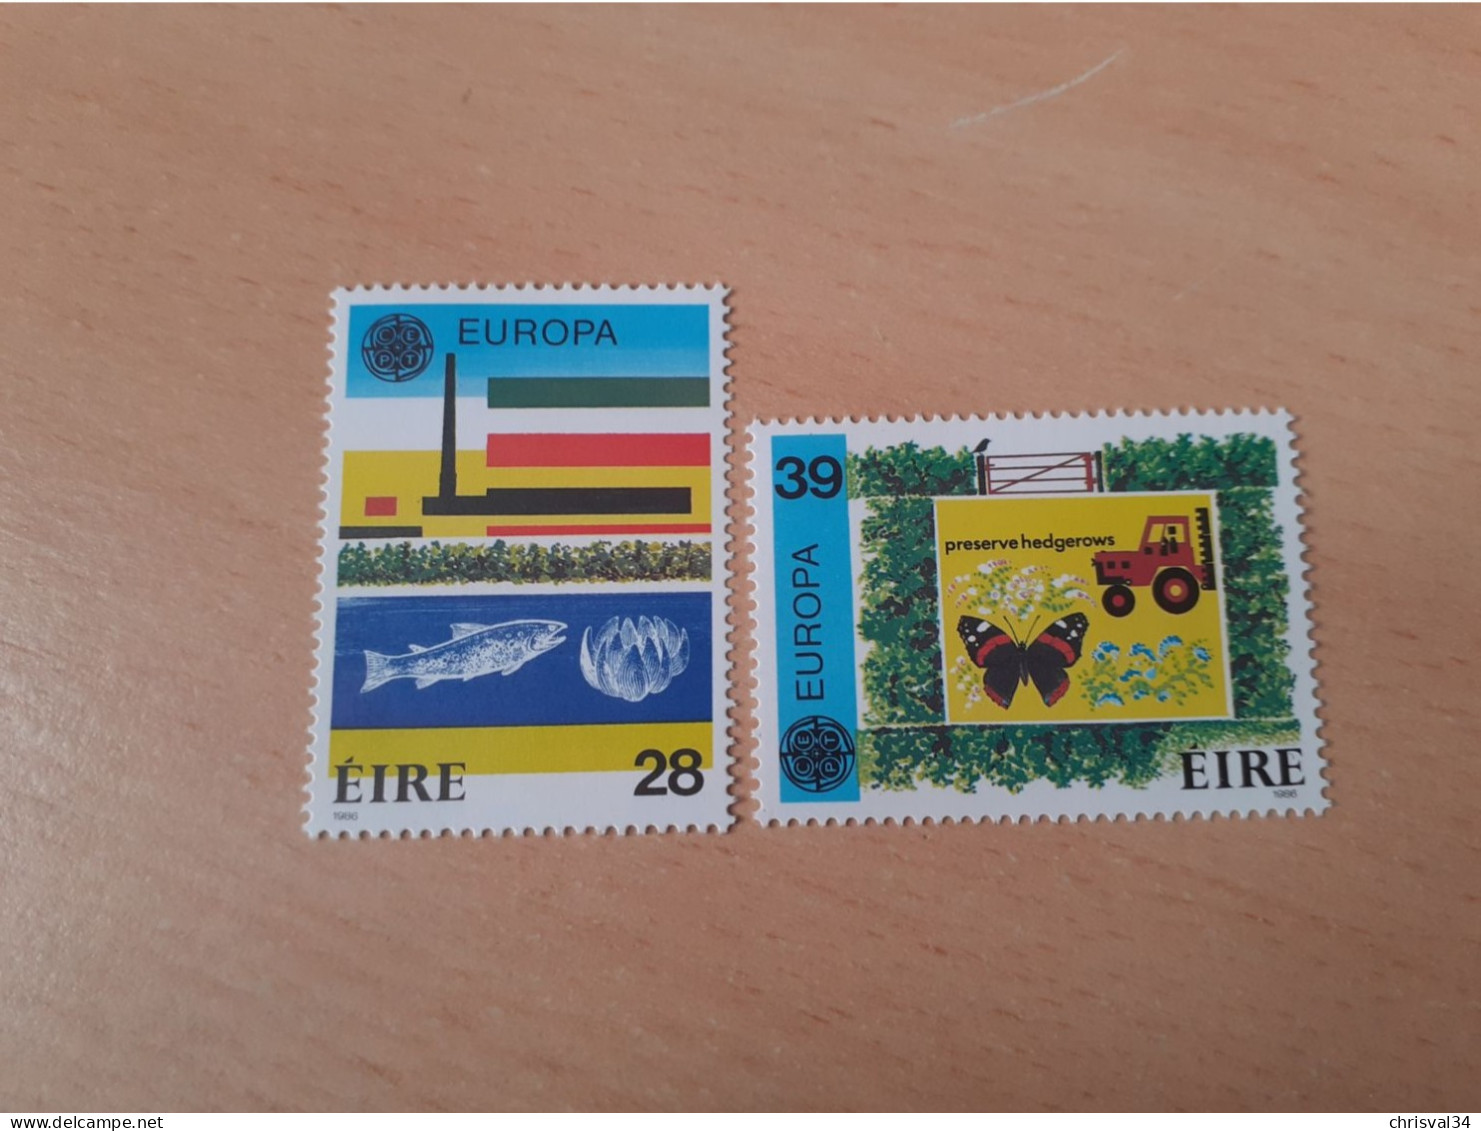 TIMBRES  IRLANDE    ANNEE   1986   N  592  /  593     NEUFS  LUXE** - Nuovi